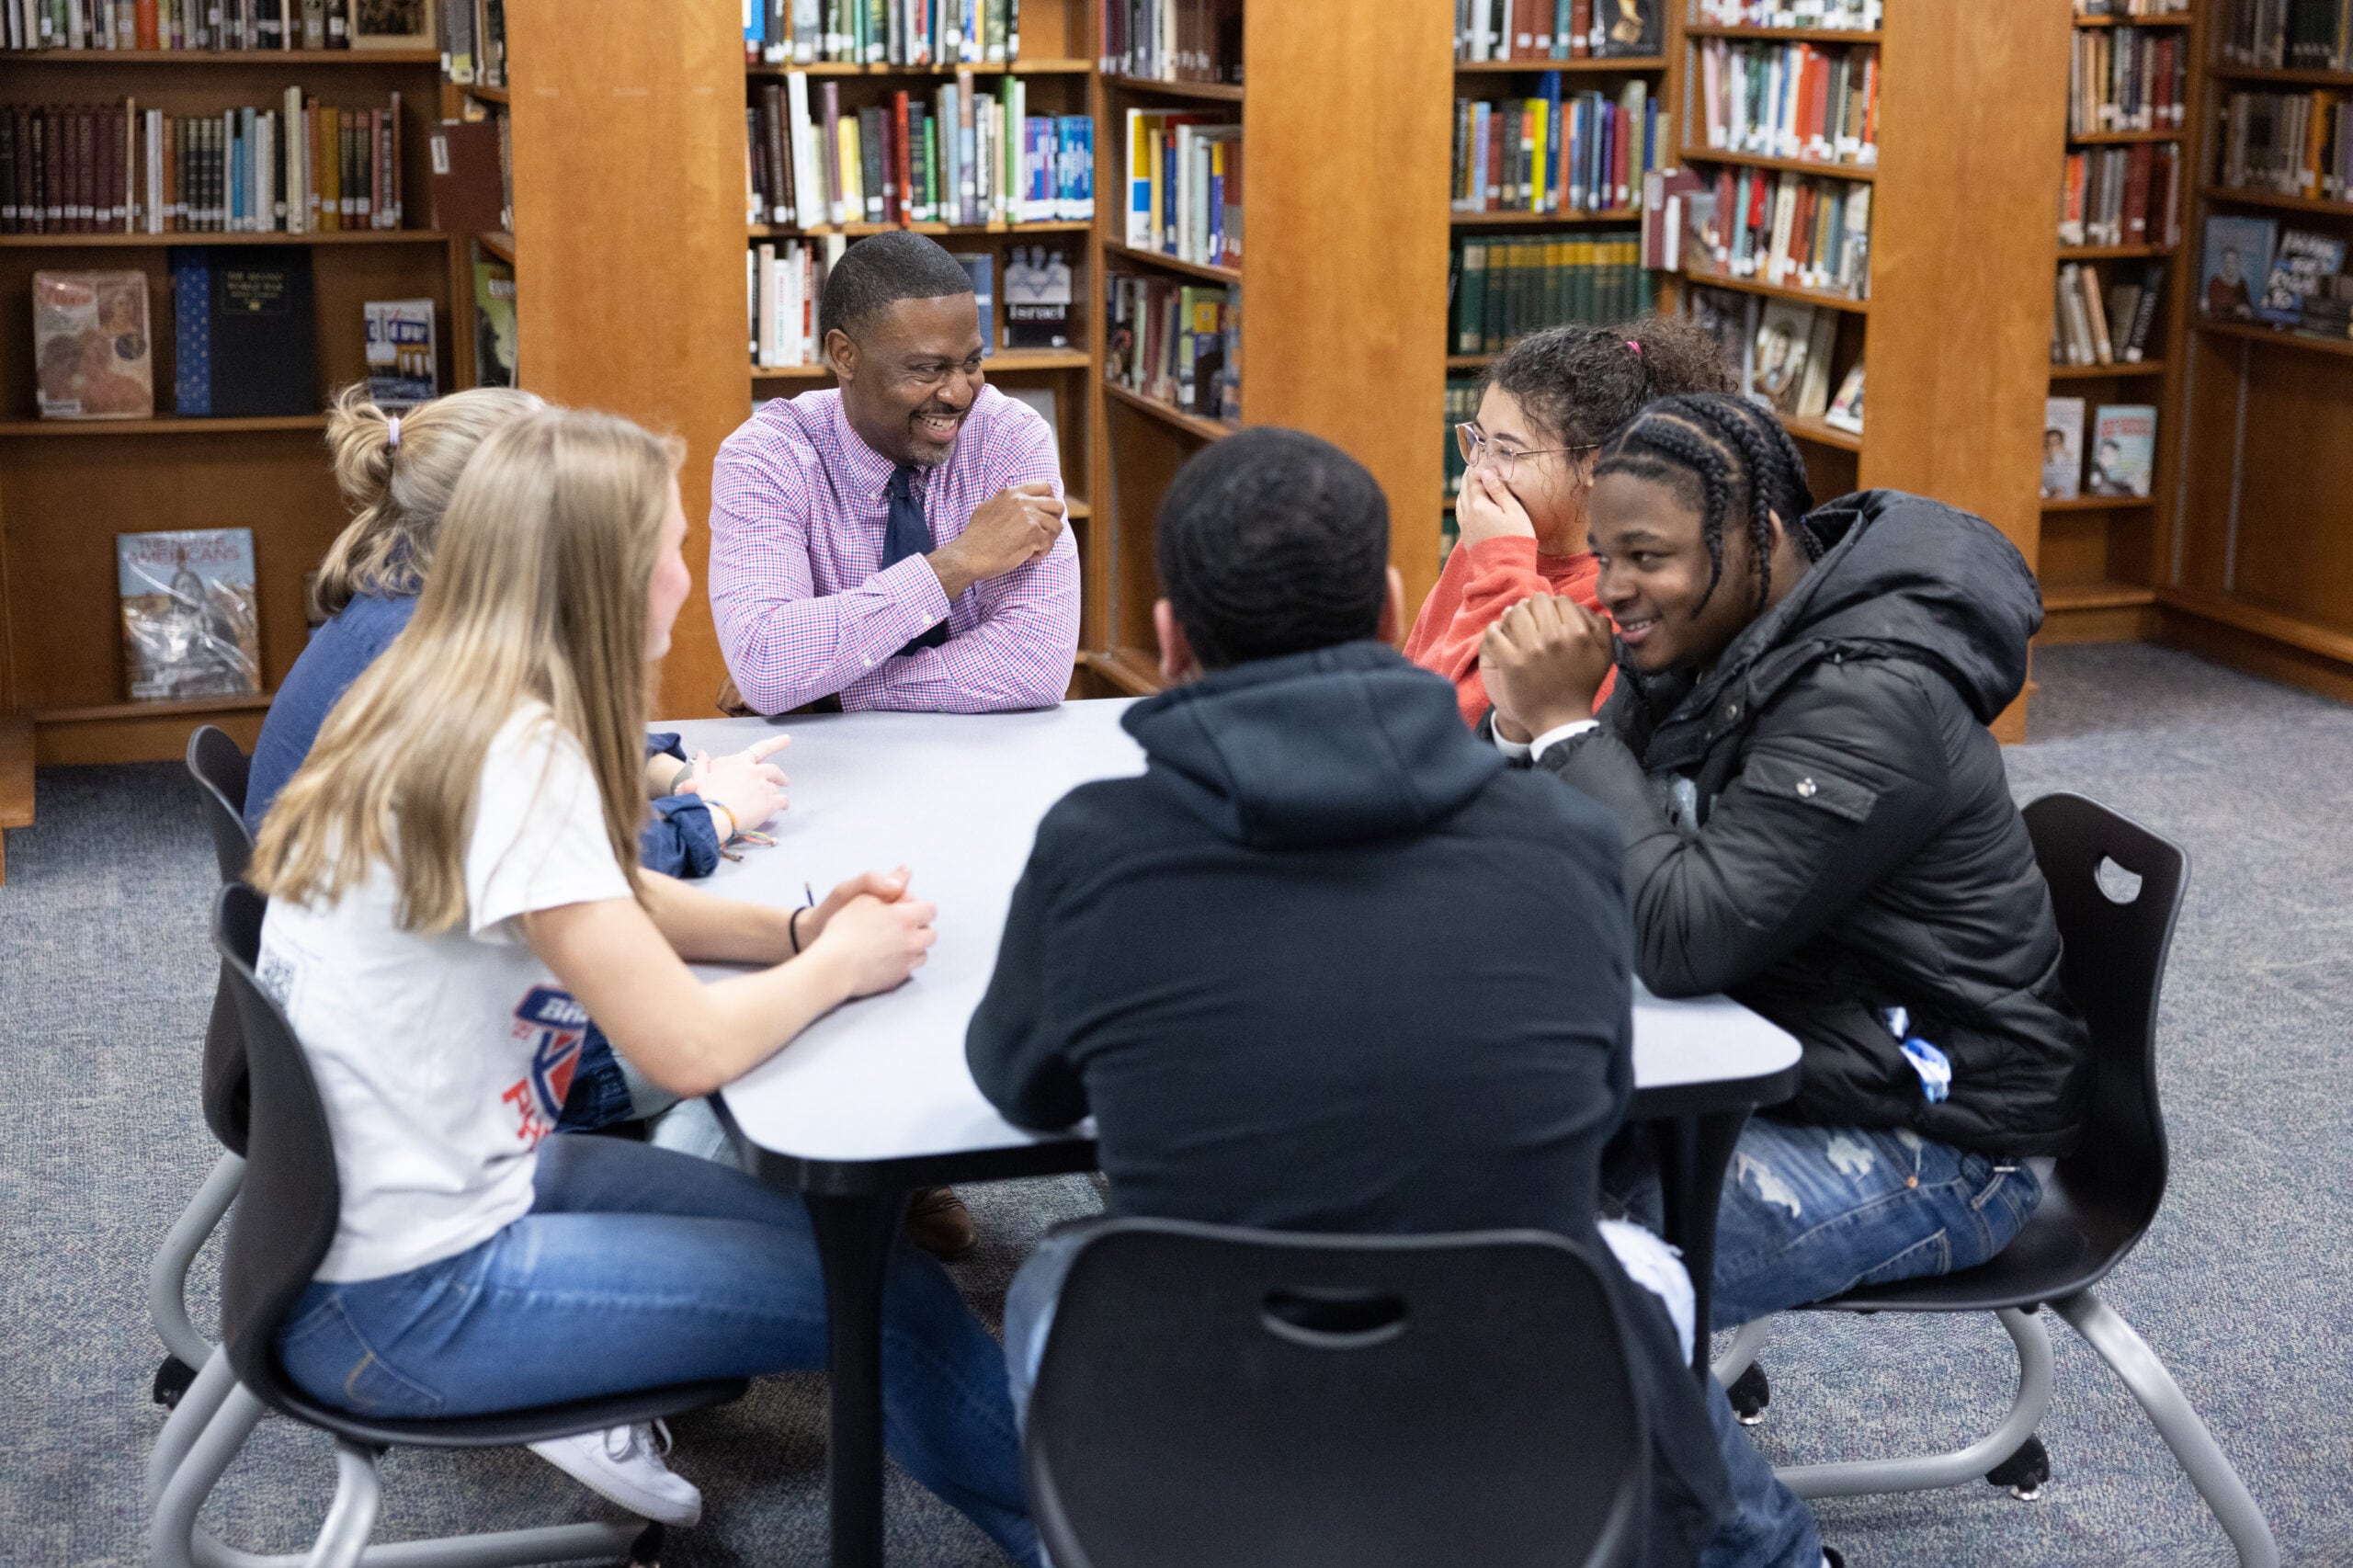 A Black male teacher smiles while sitting at a table and looking at a group of five high school students of different races.